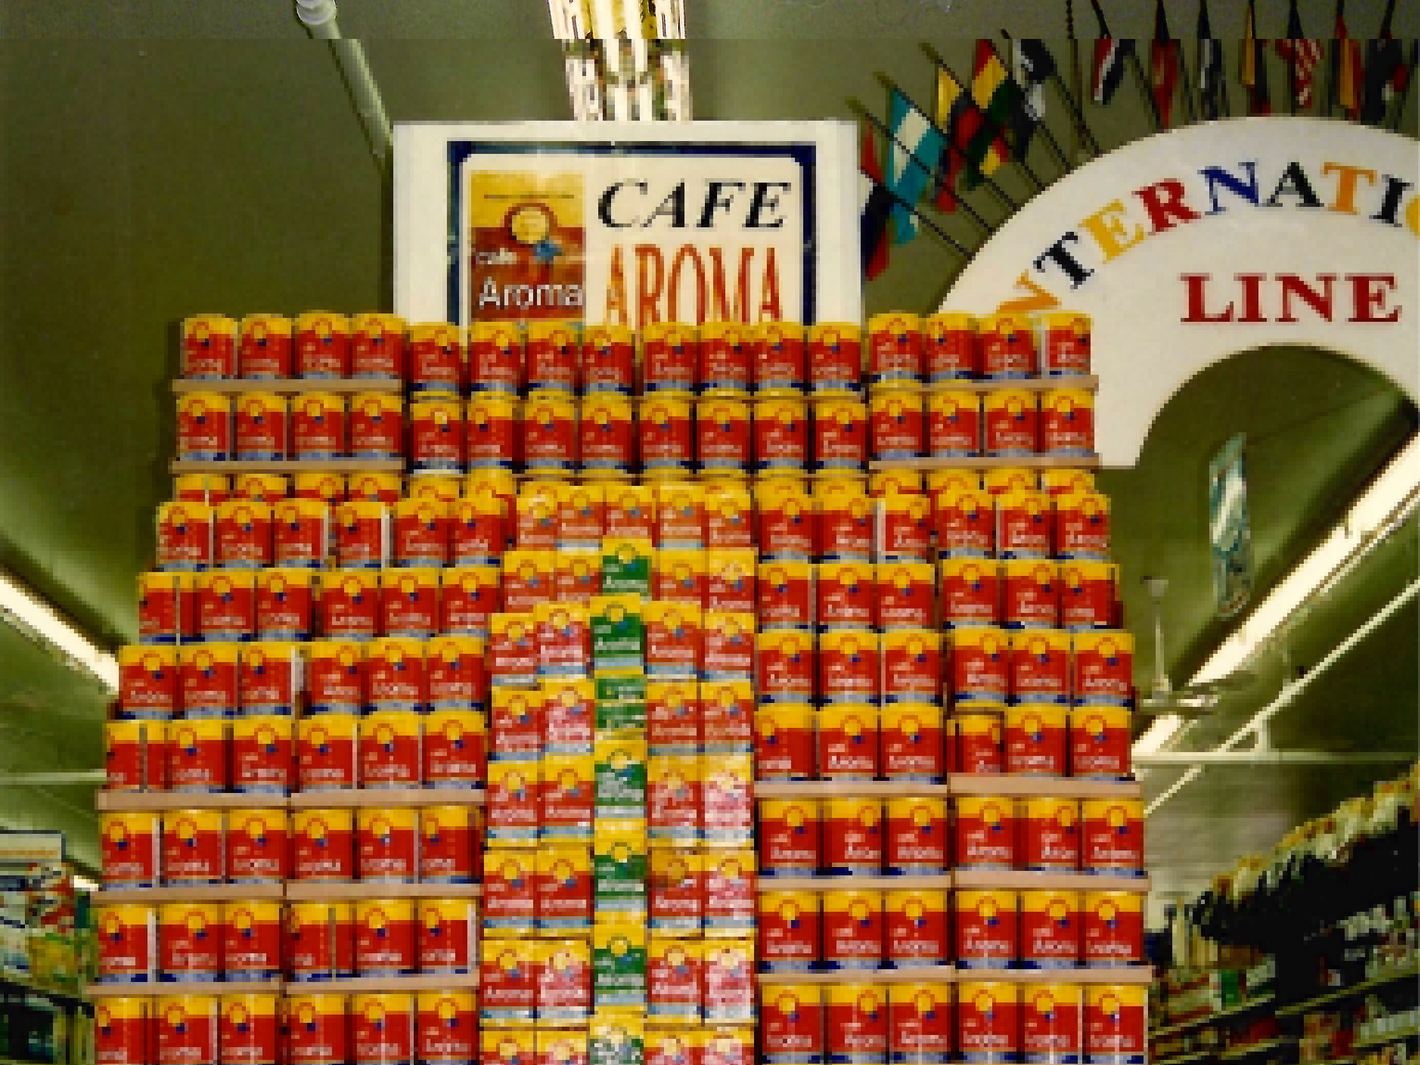 Stacks of Café Aroma Coffee Cans in grocery store